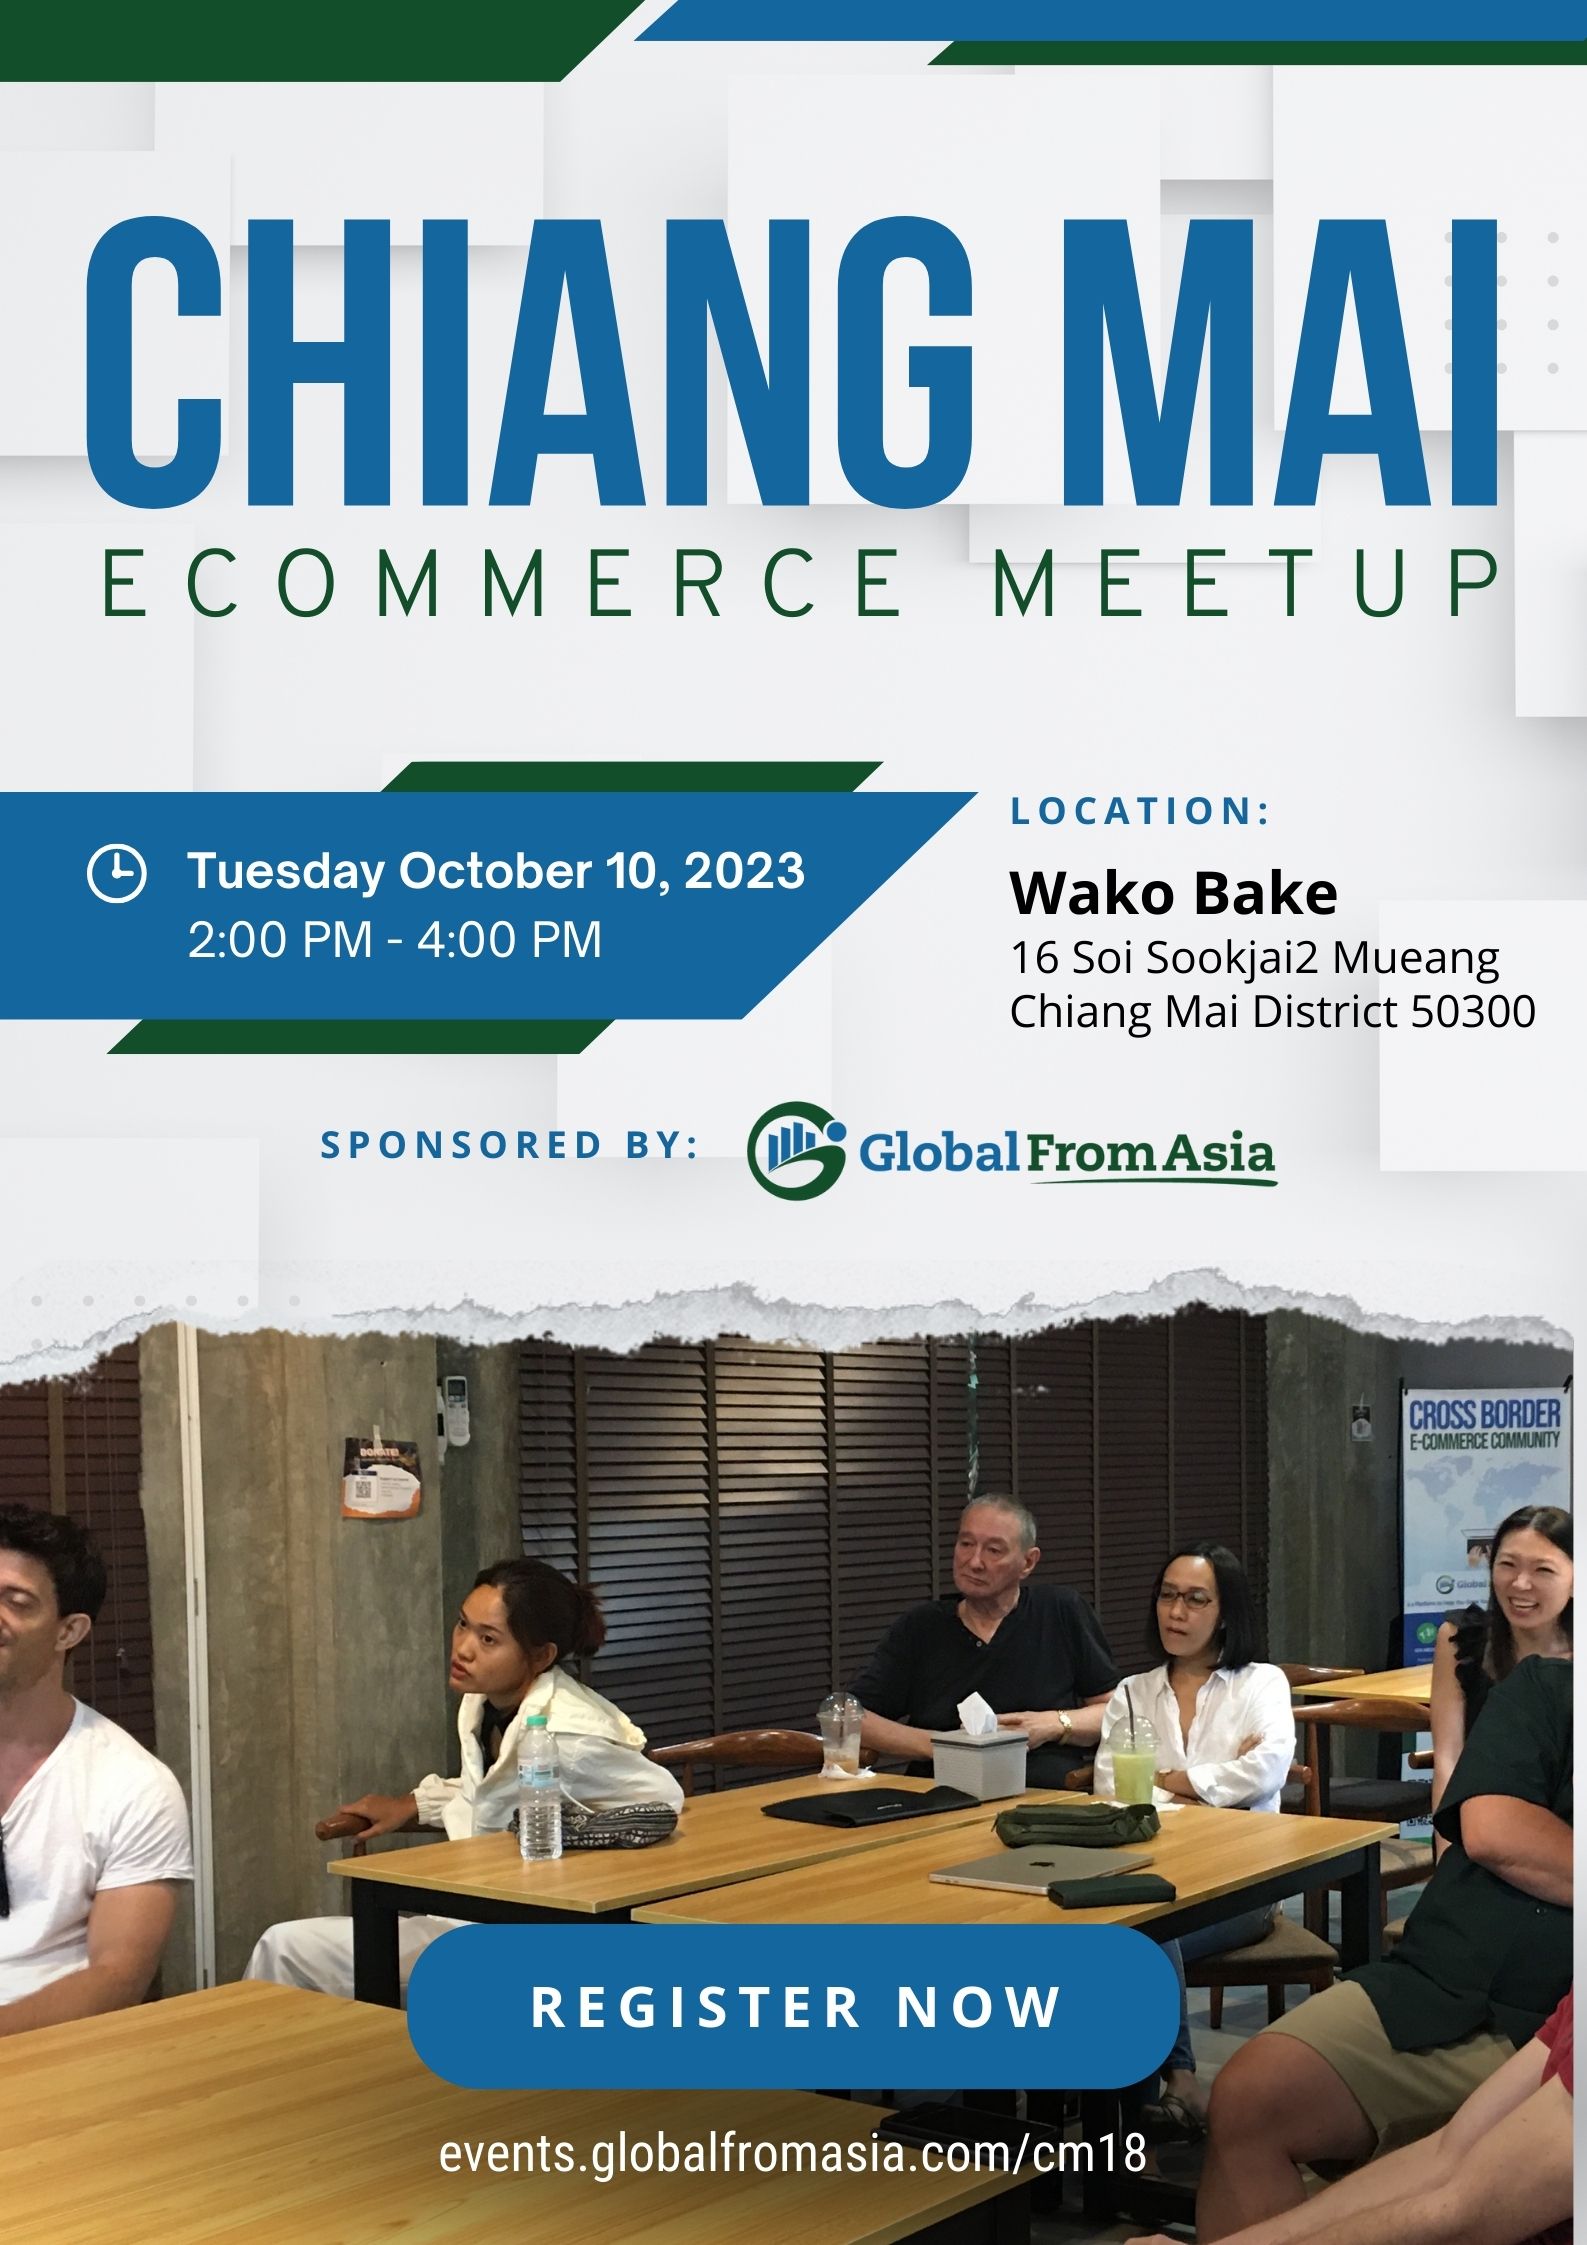 Chiang Mai Ecommerce Round Table & Networking Meet-up